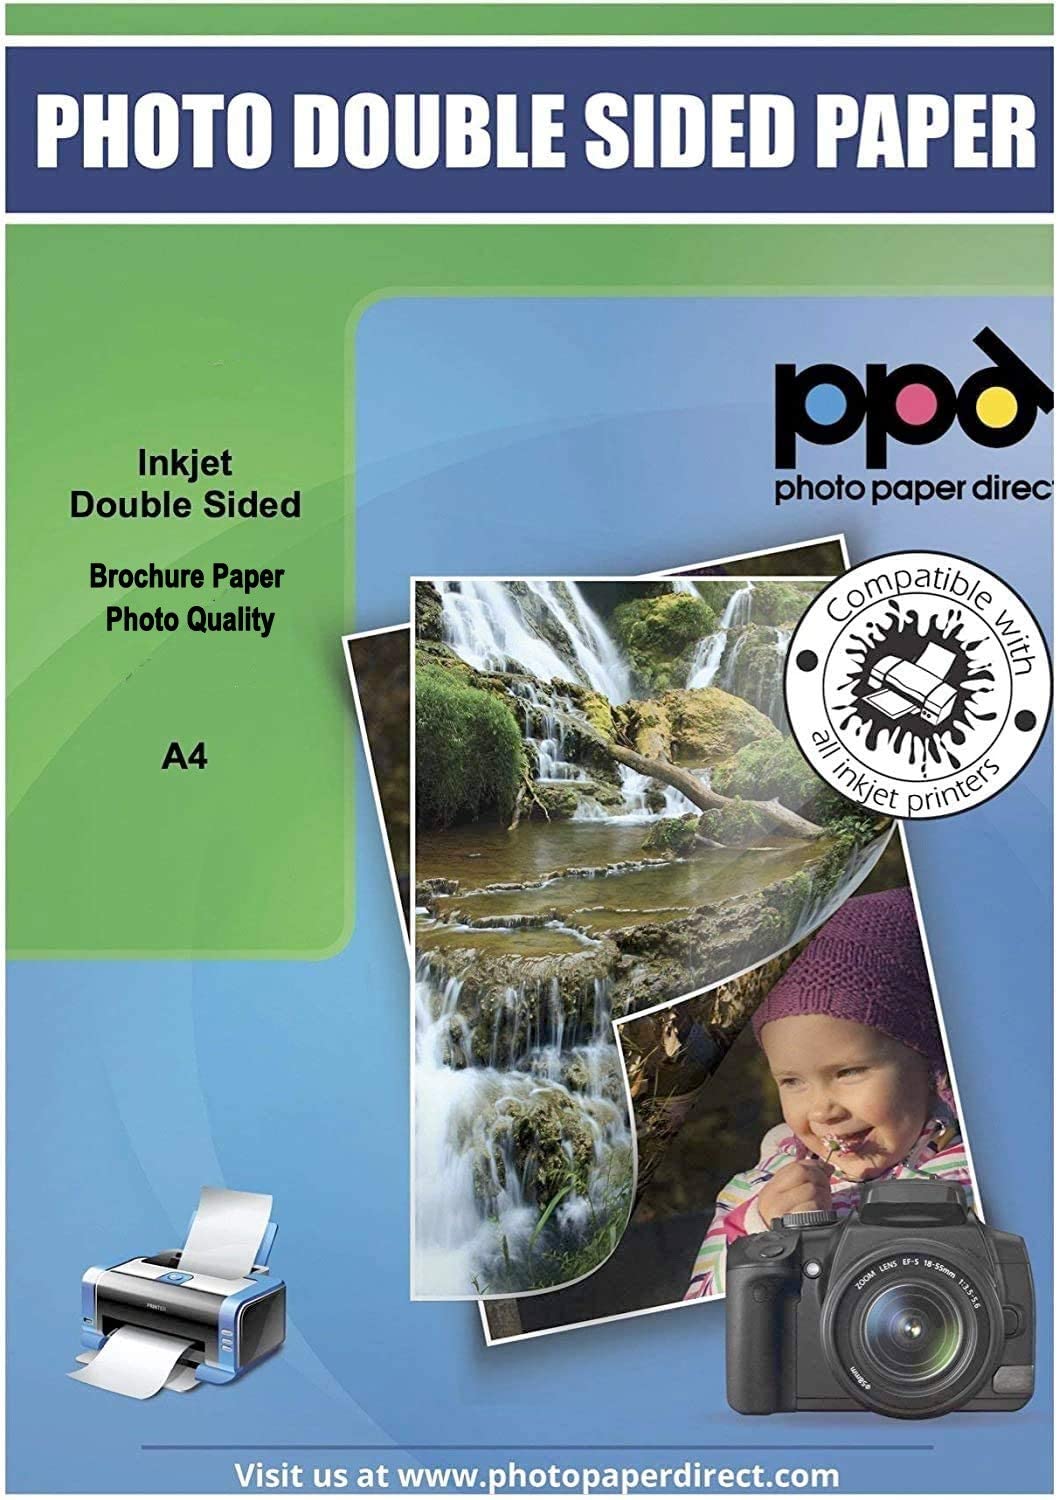 PPD Inkjet Brochure Paper Double Sided Smooth Matt Finish 35lb. 130gsm 6.3mil A4 PPD-40